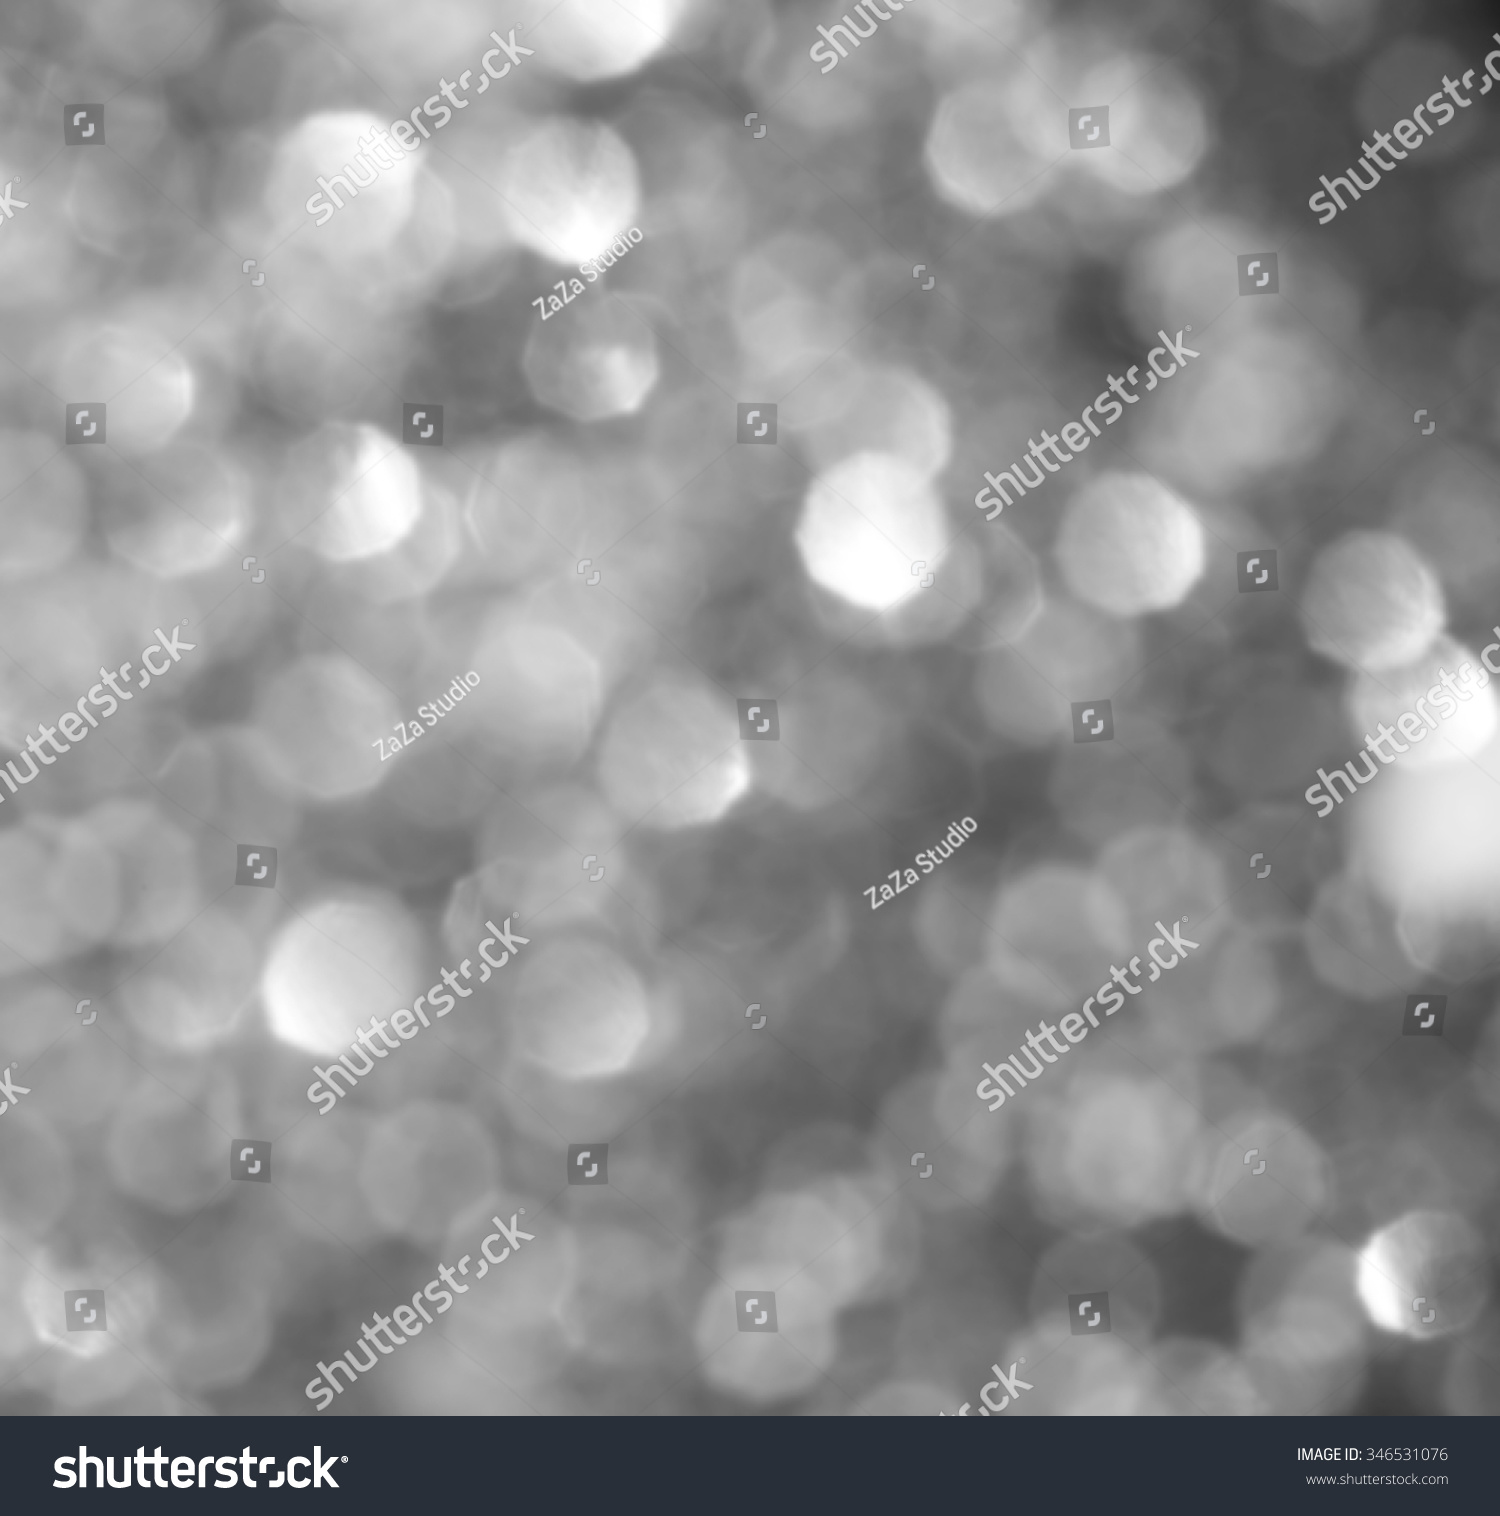 Christmas Background. Golden Holiday Abstract Glitter Defocused Background With Blinking Stars. Blurred Bokeh #346531076